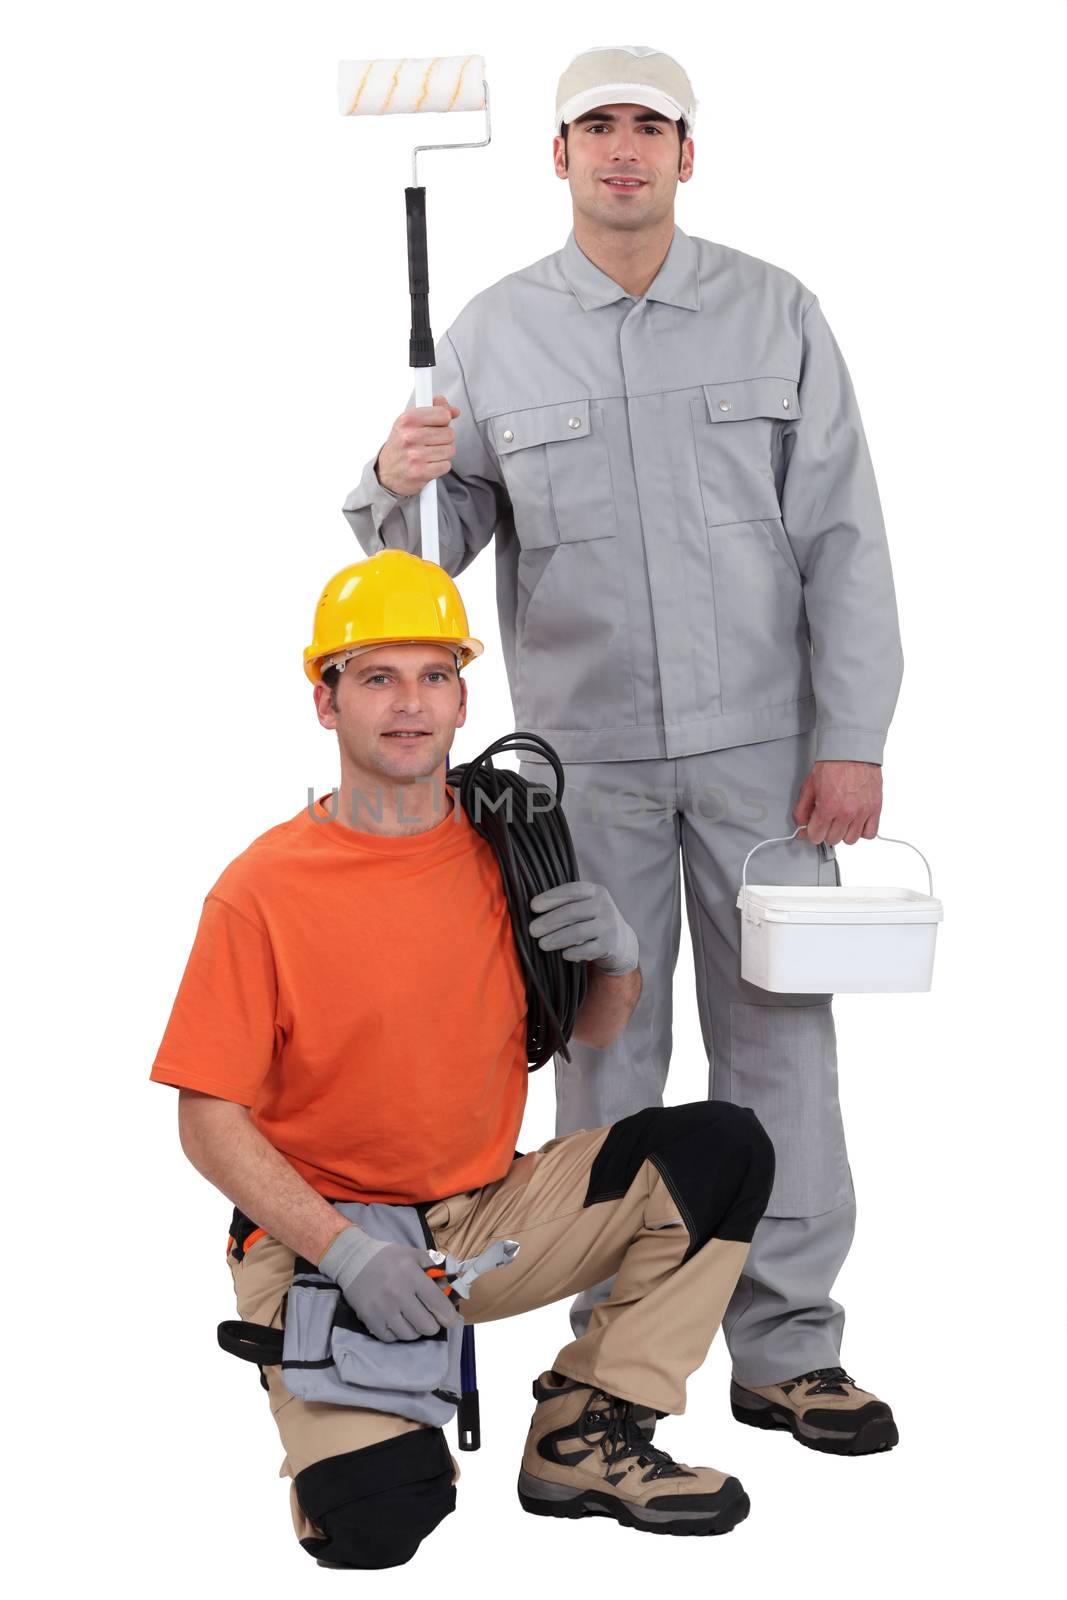 Electrician kneeling by painter by phovoir